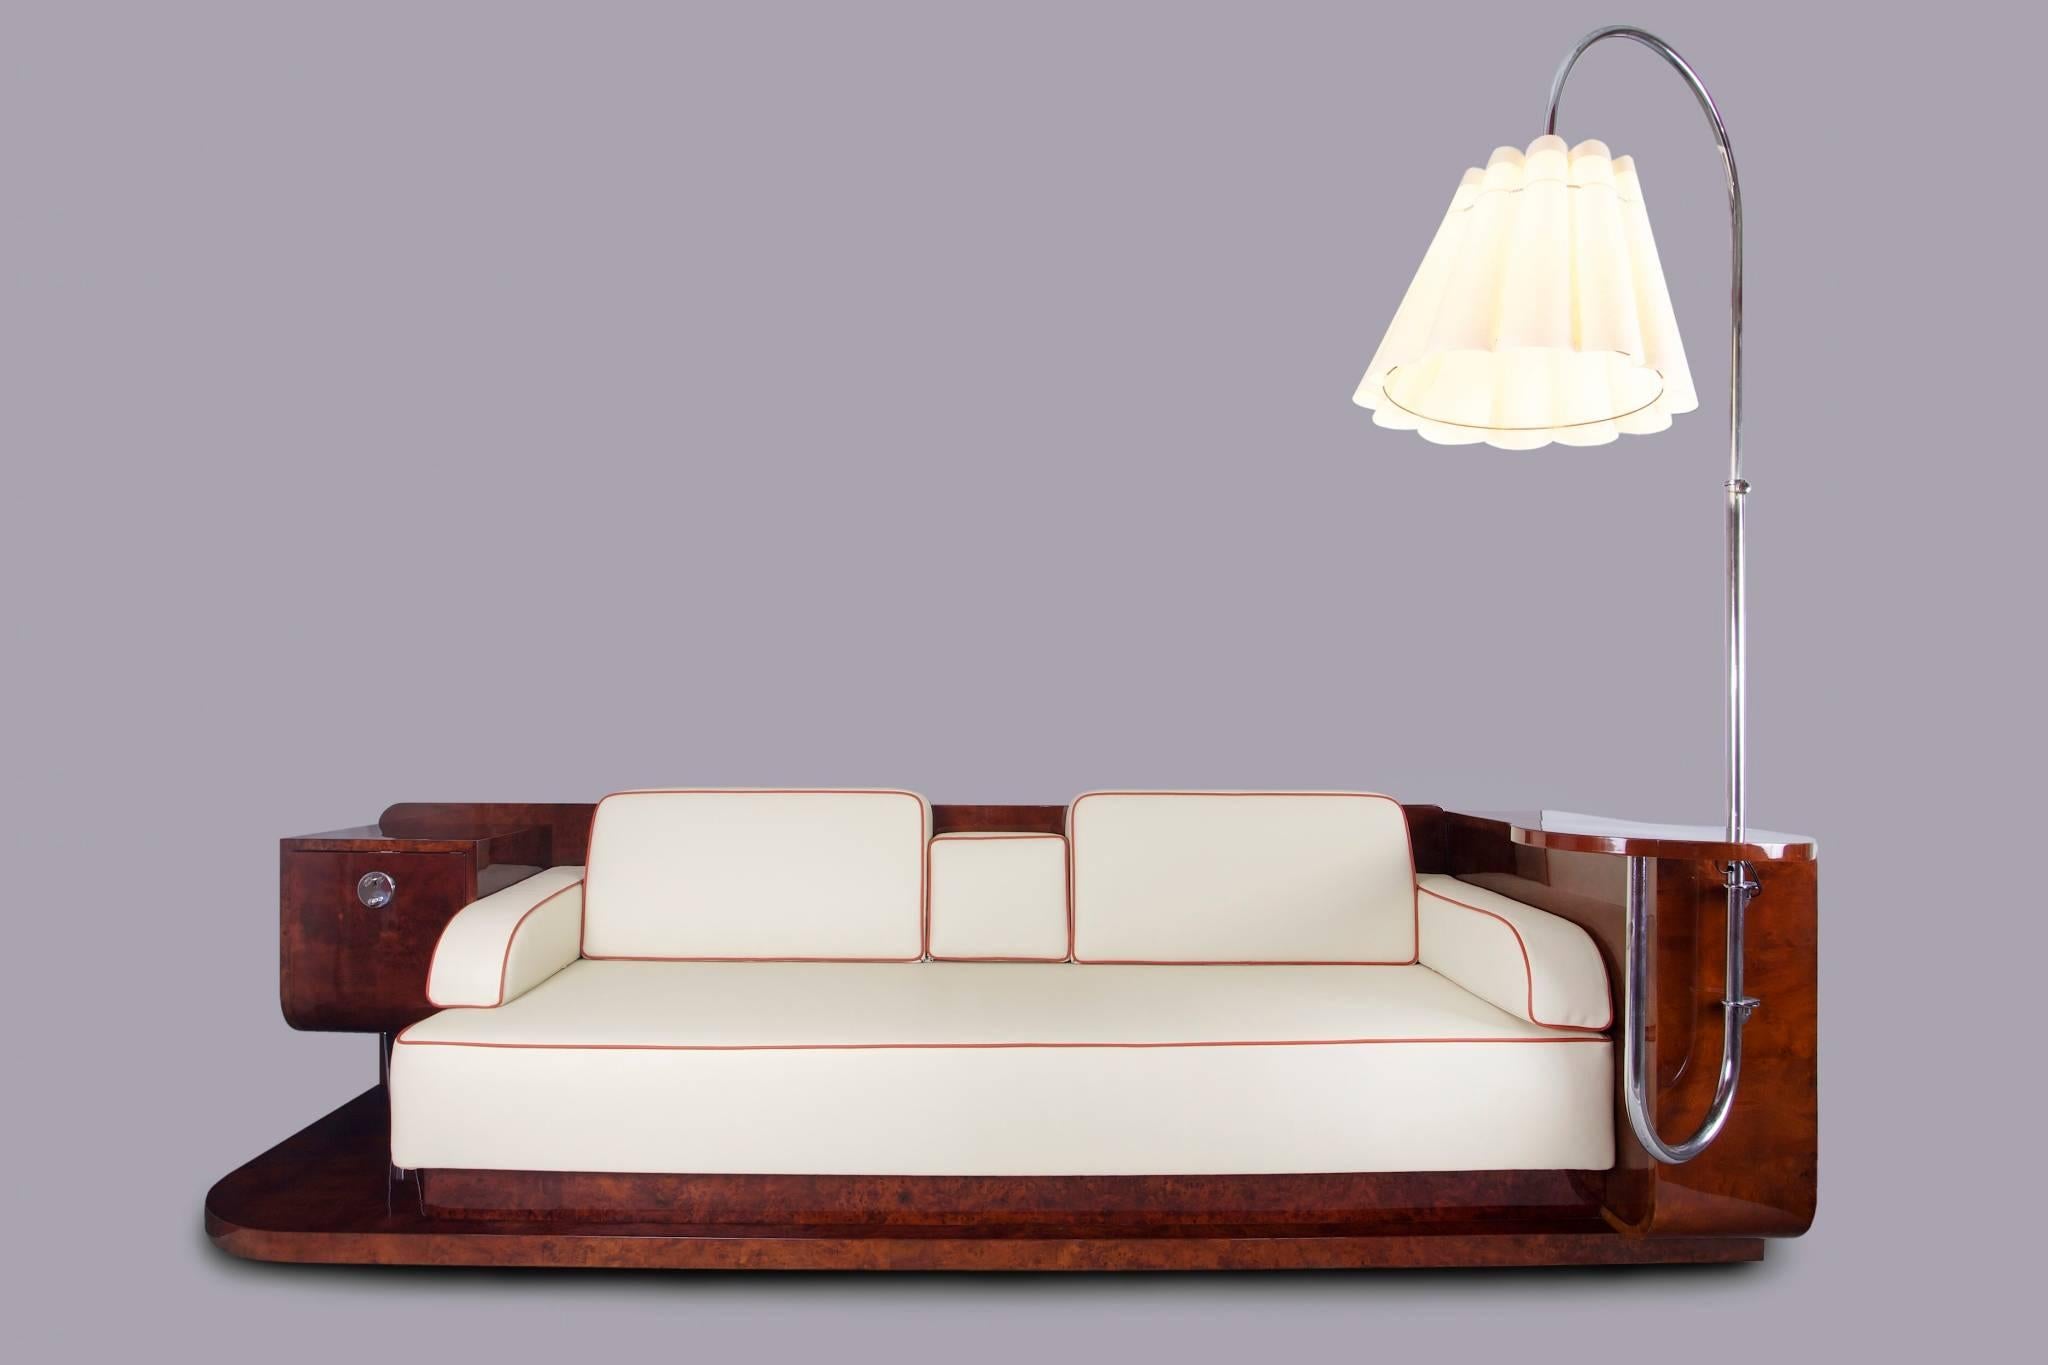 Unique wide Art Deco sofa with lamp.
Completely restored to high gloss.
Period: 1930-1939
Source: Czechoslovakia.

We guarantee safe a the cheapest air transport from Europe to the whole world within 7 days.
The price is the same as for ship